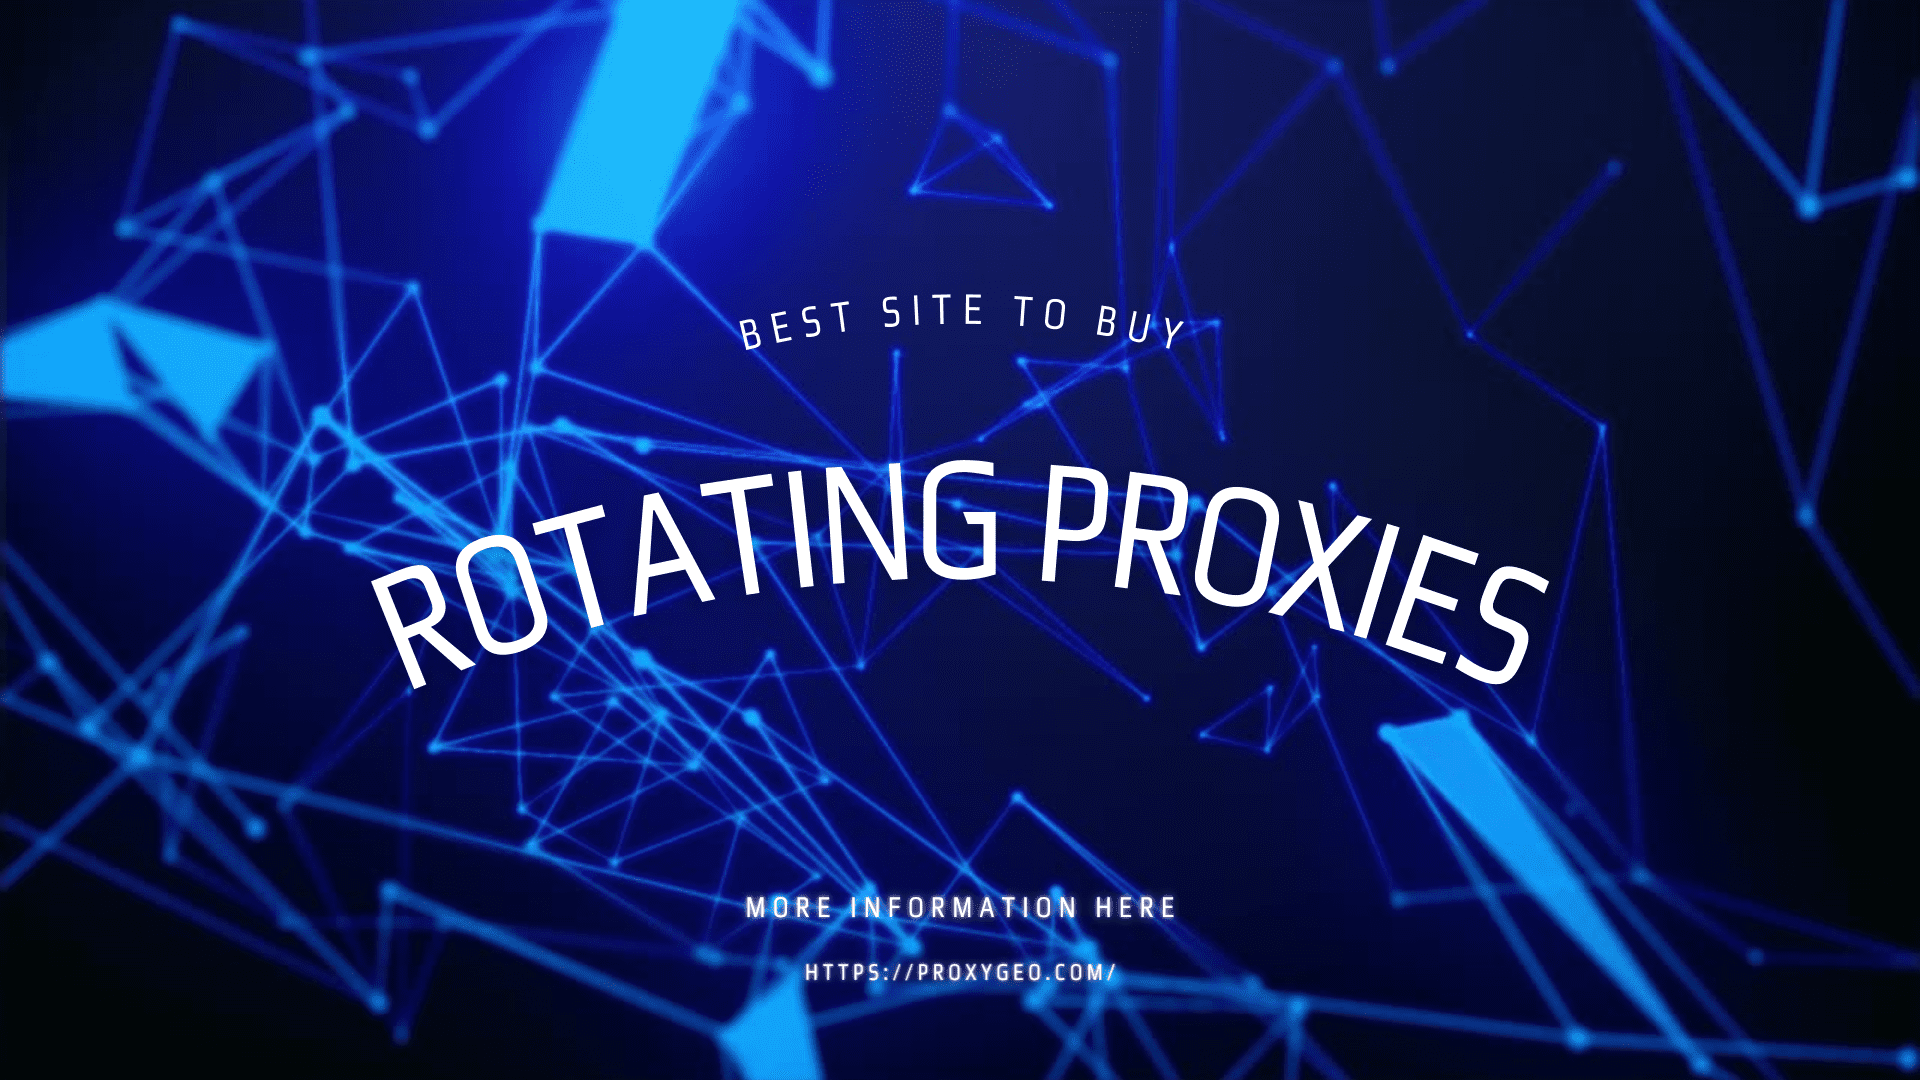 Best Site to Buy Rotating Proxies